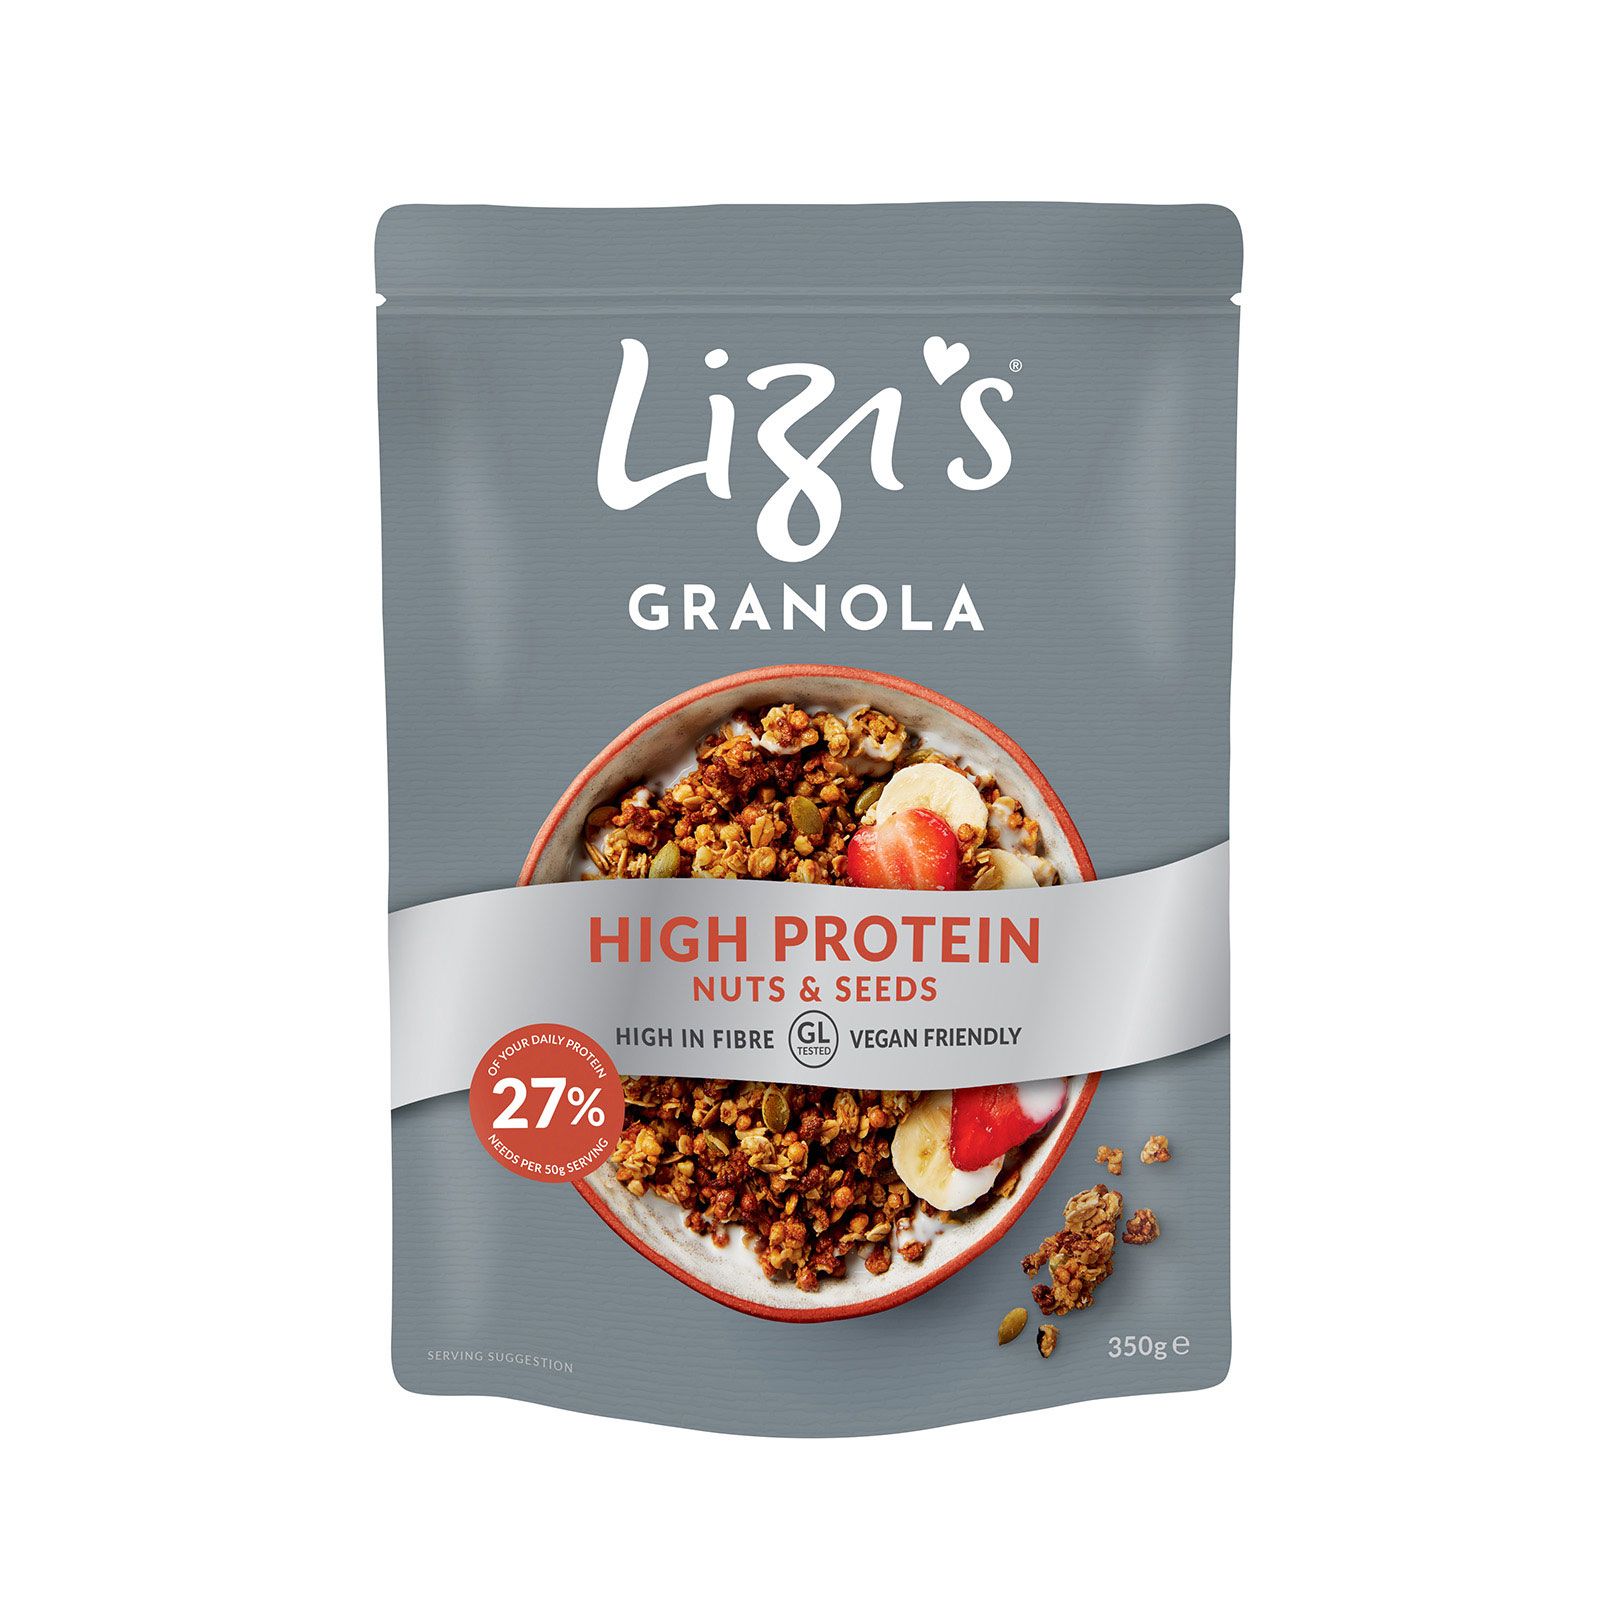 High Protein Nuts and Seeds Granola - Image